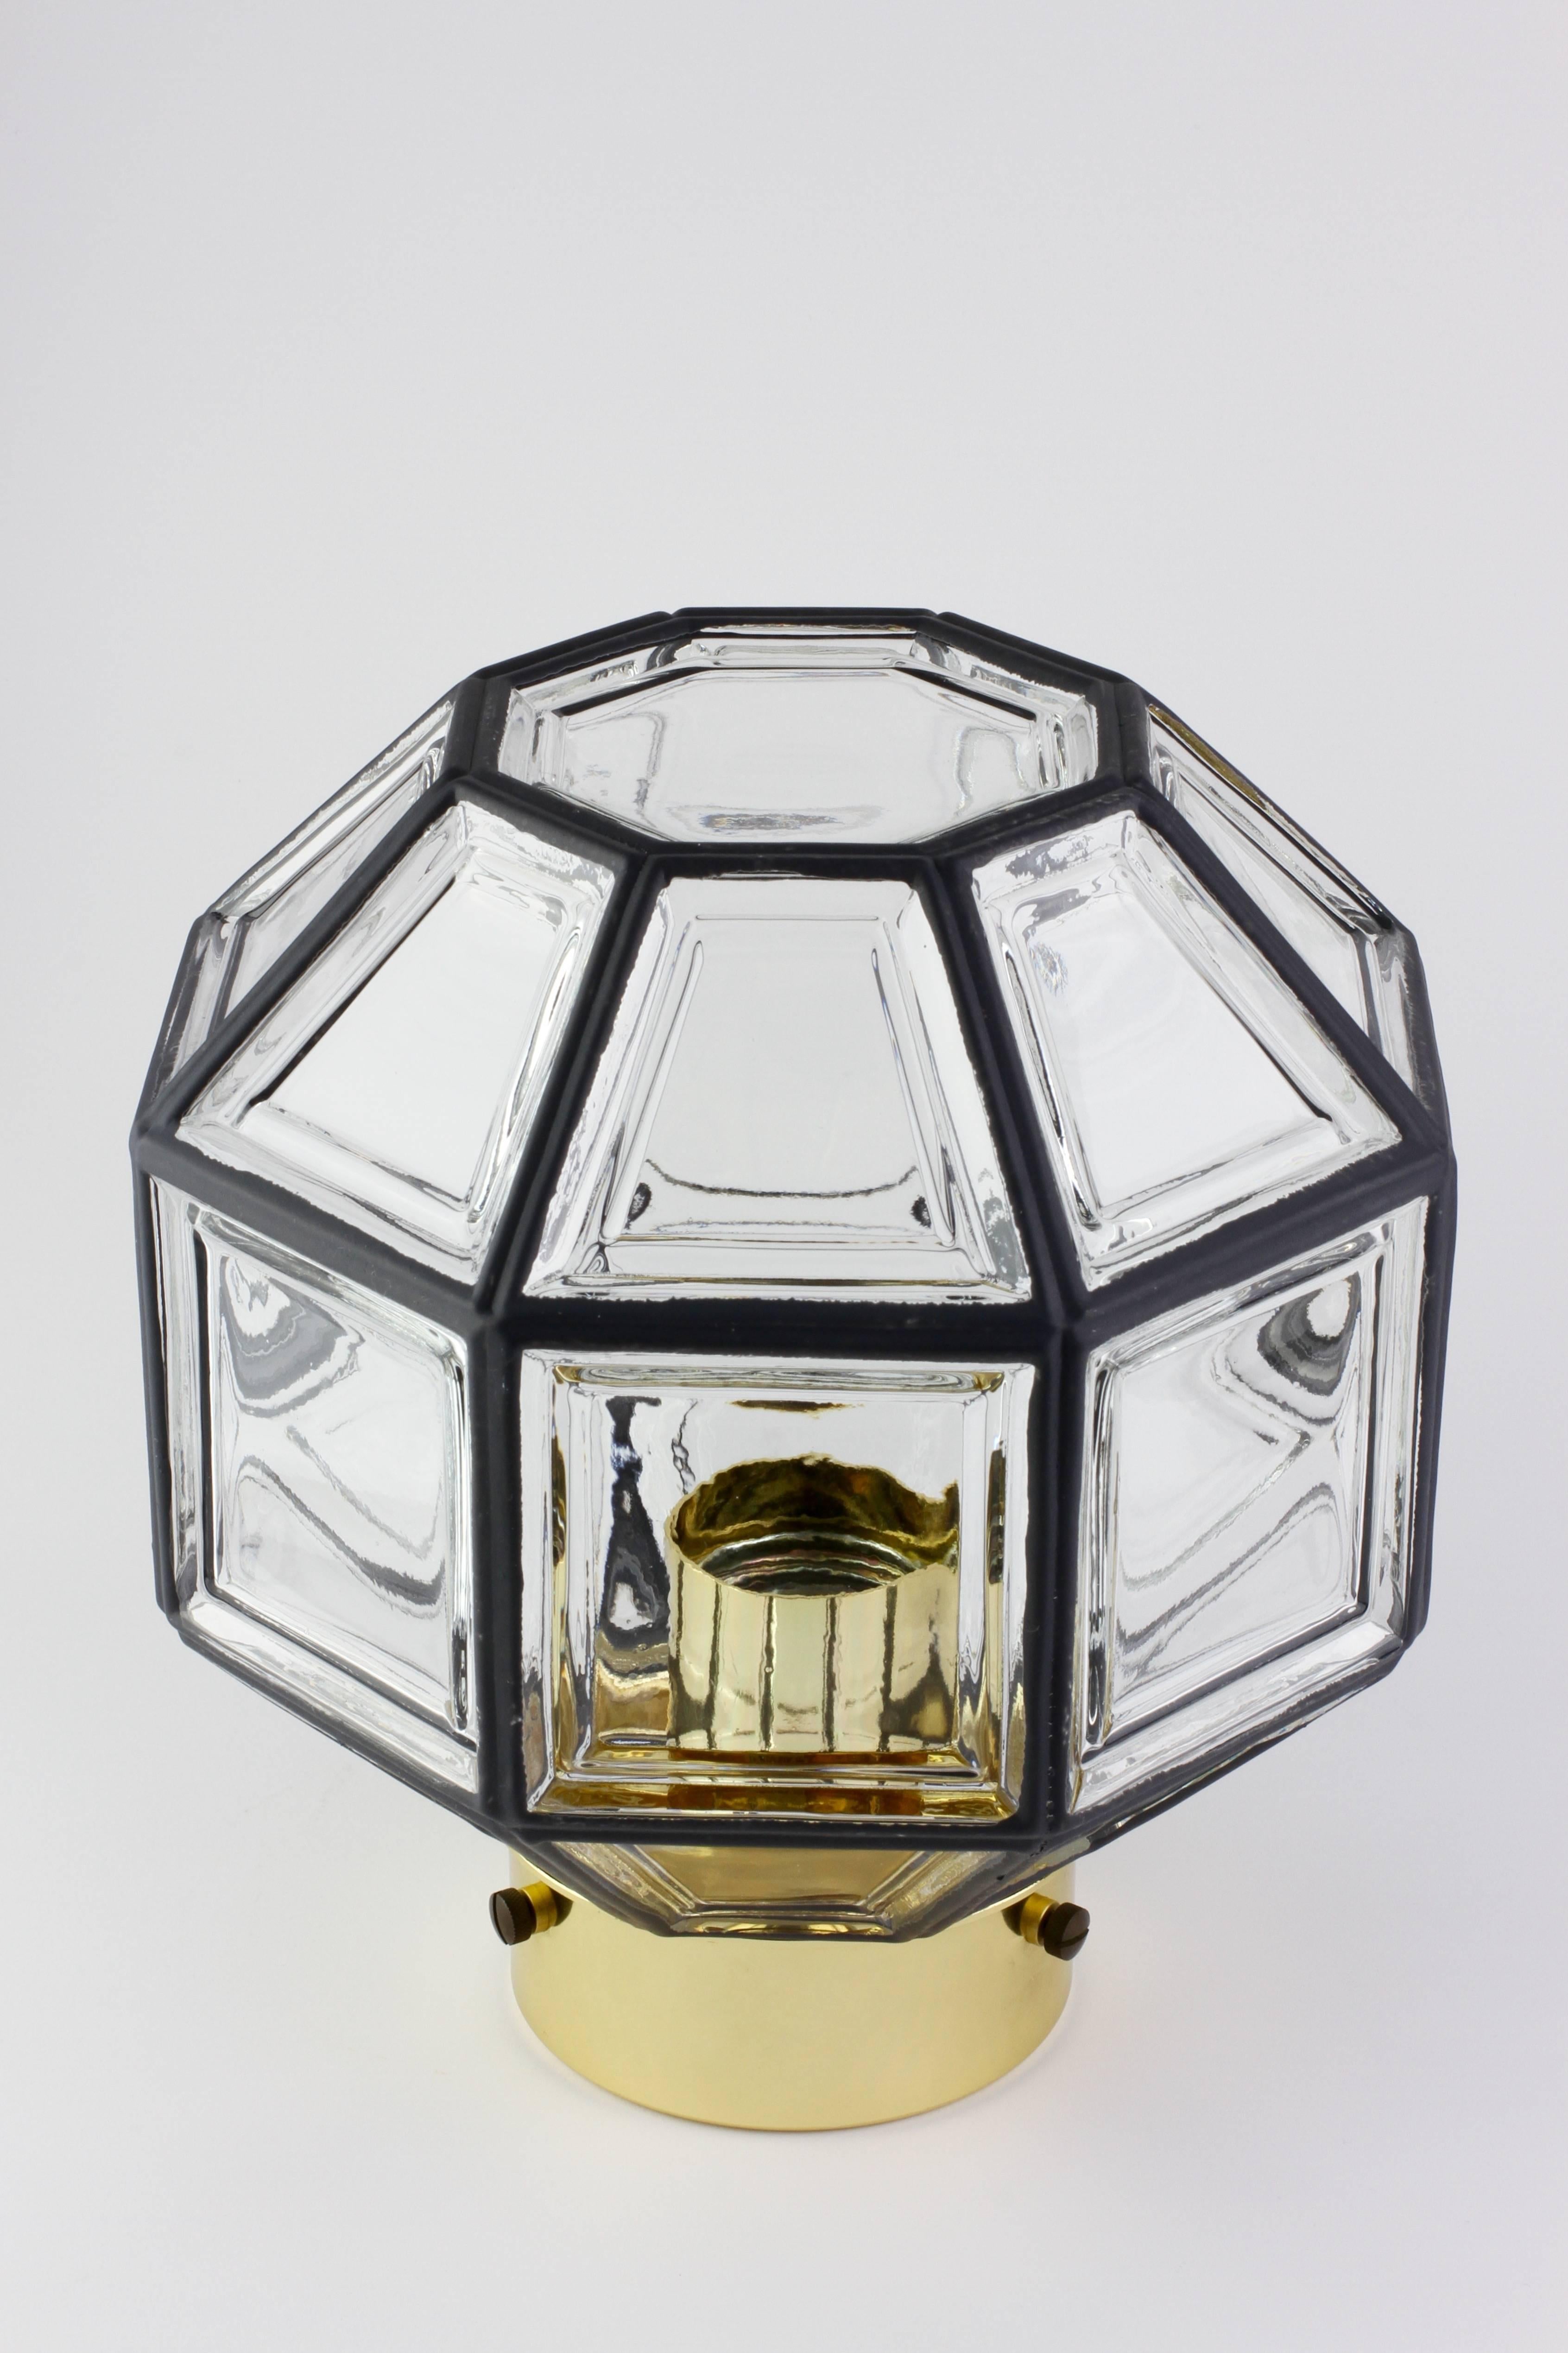 One of a set of five octagonally shaped, Mid-Century minimalist German made flush mount light fixtures produced by Glashütte, Limburg, circa 1965. These Contemporary Art Deco and lantern style Plafonniers cast a fantastic light when mounted on the